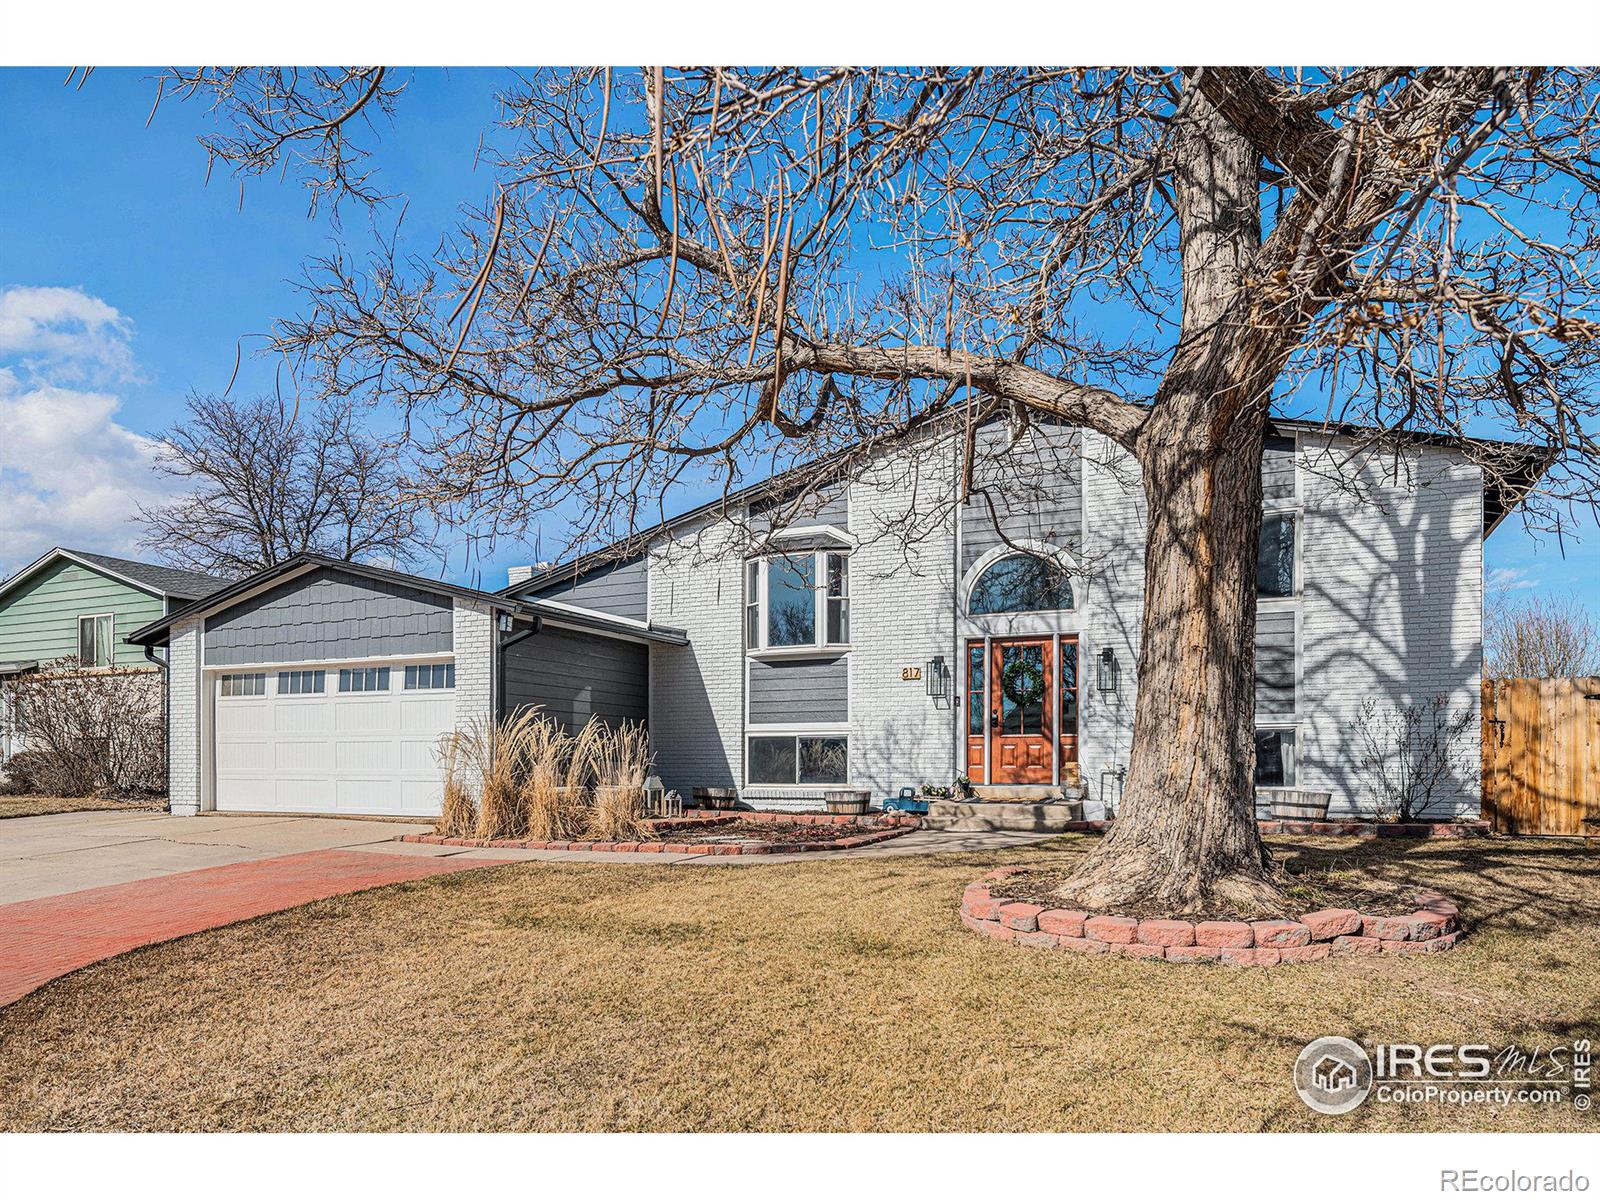 817 w 35th street, loveland sold home. Closed on 2024-03-26 for $527,000.